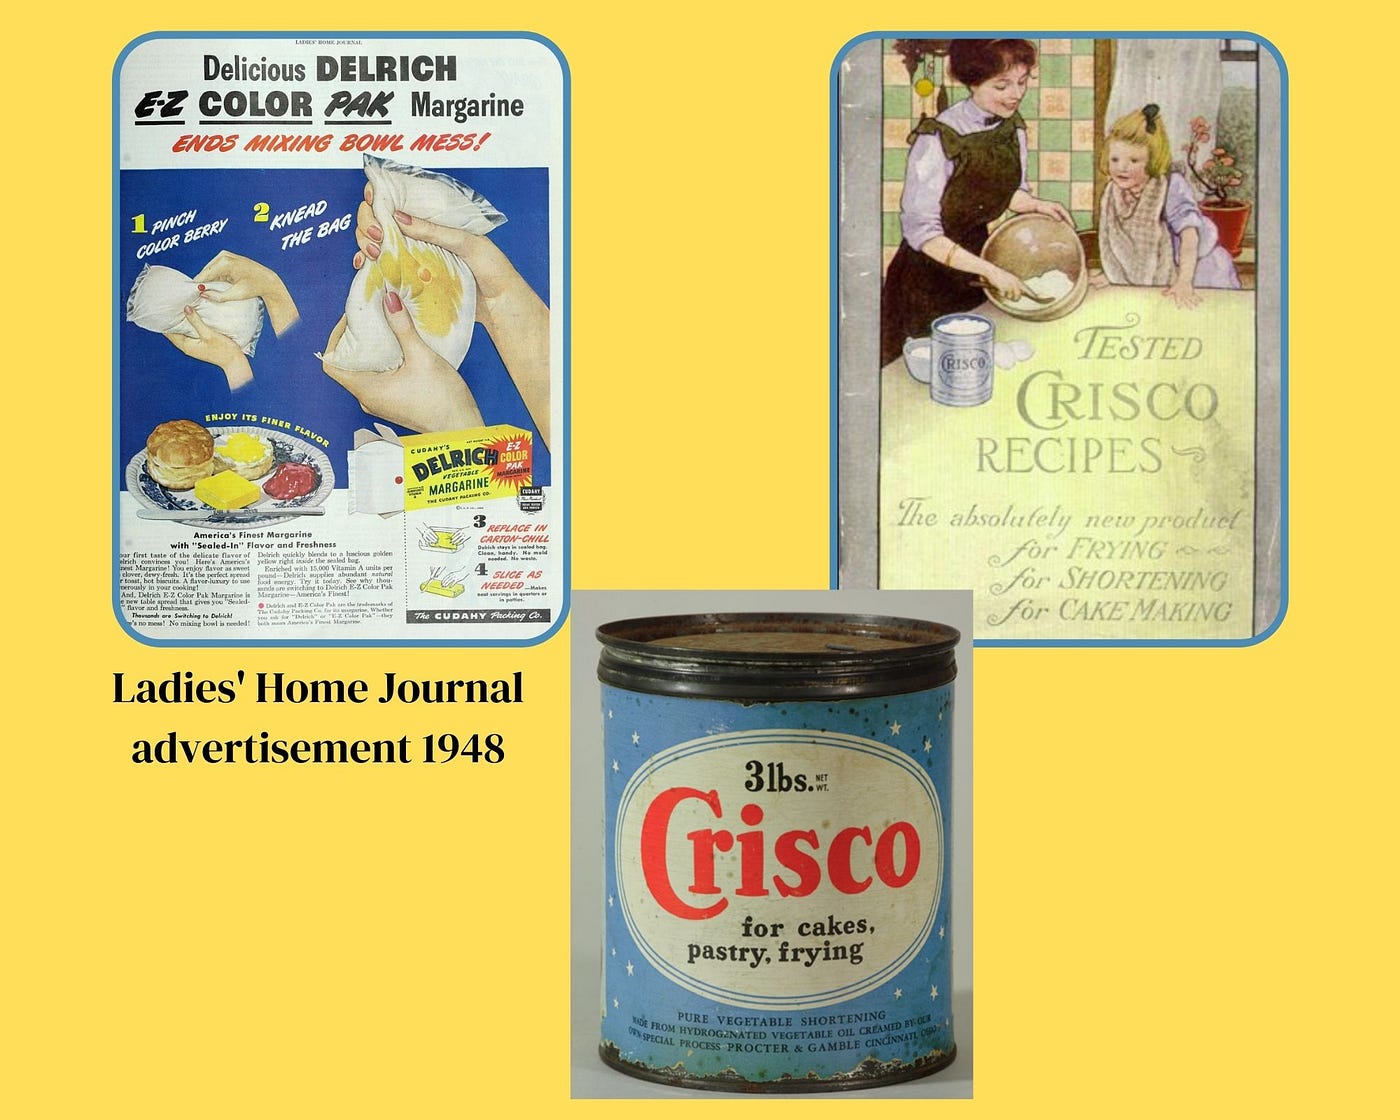 How Crisco toppled lard – and made Americans believers in industrial food